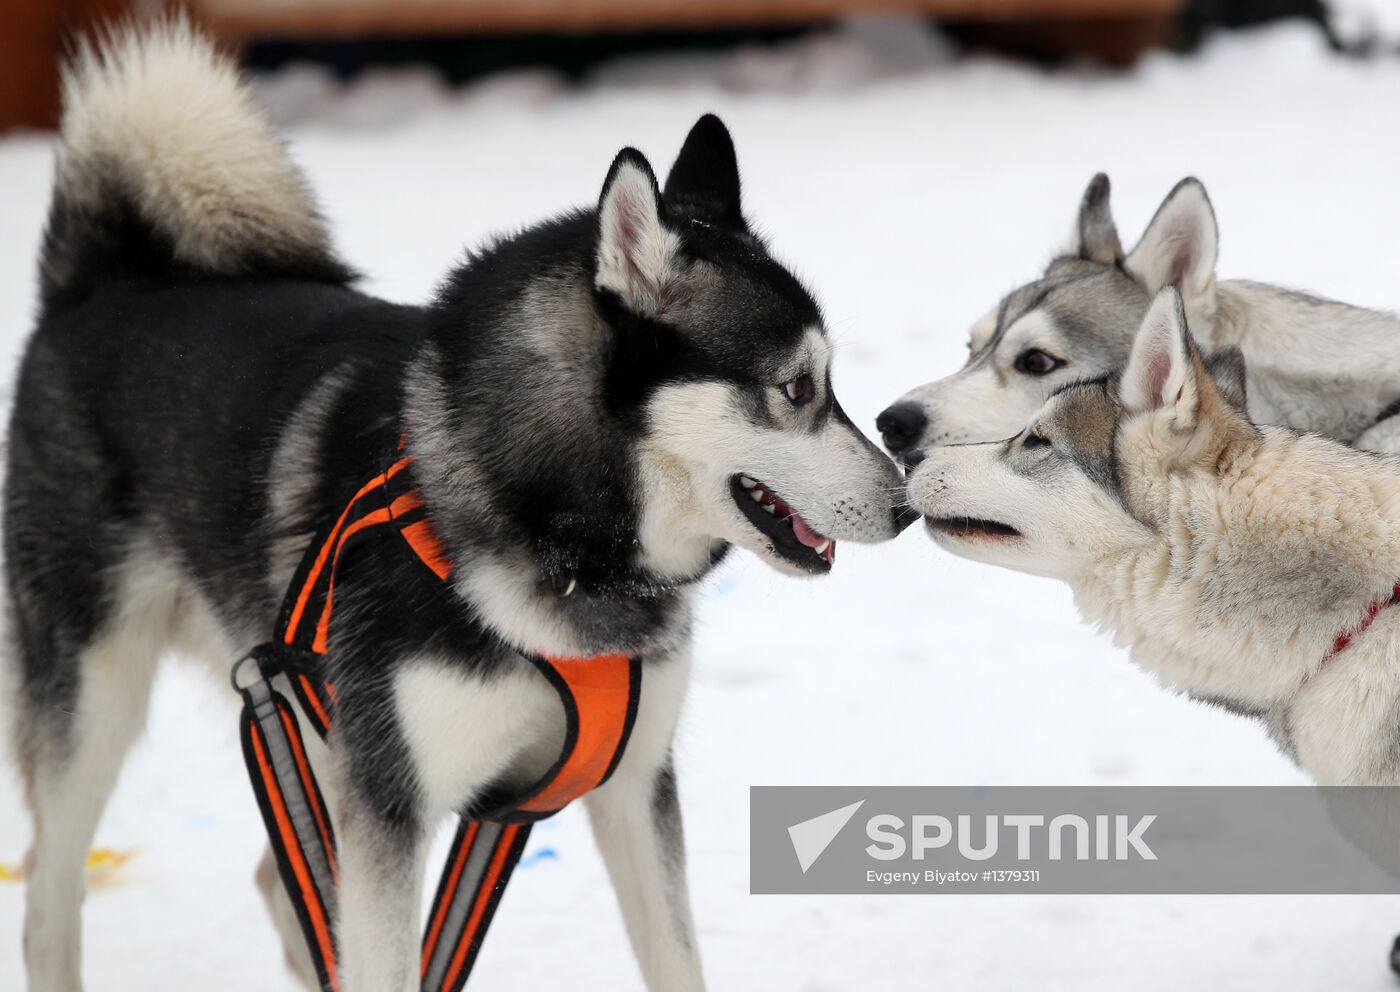 Dog sledding race in Moscow